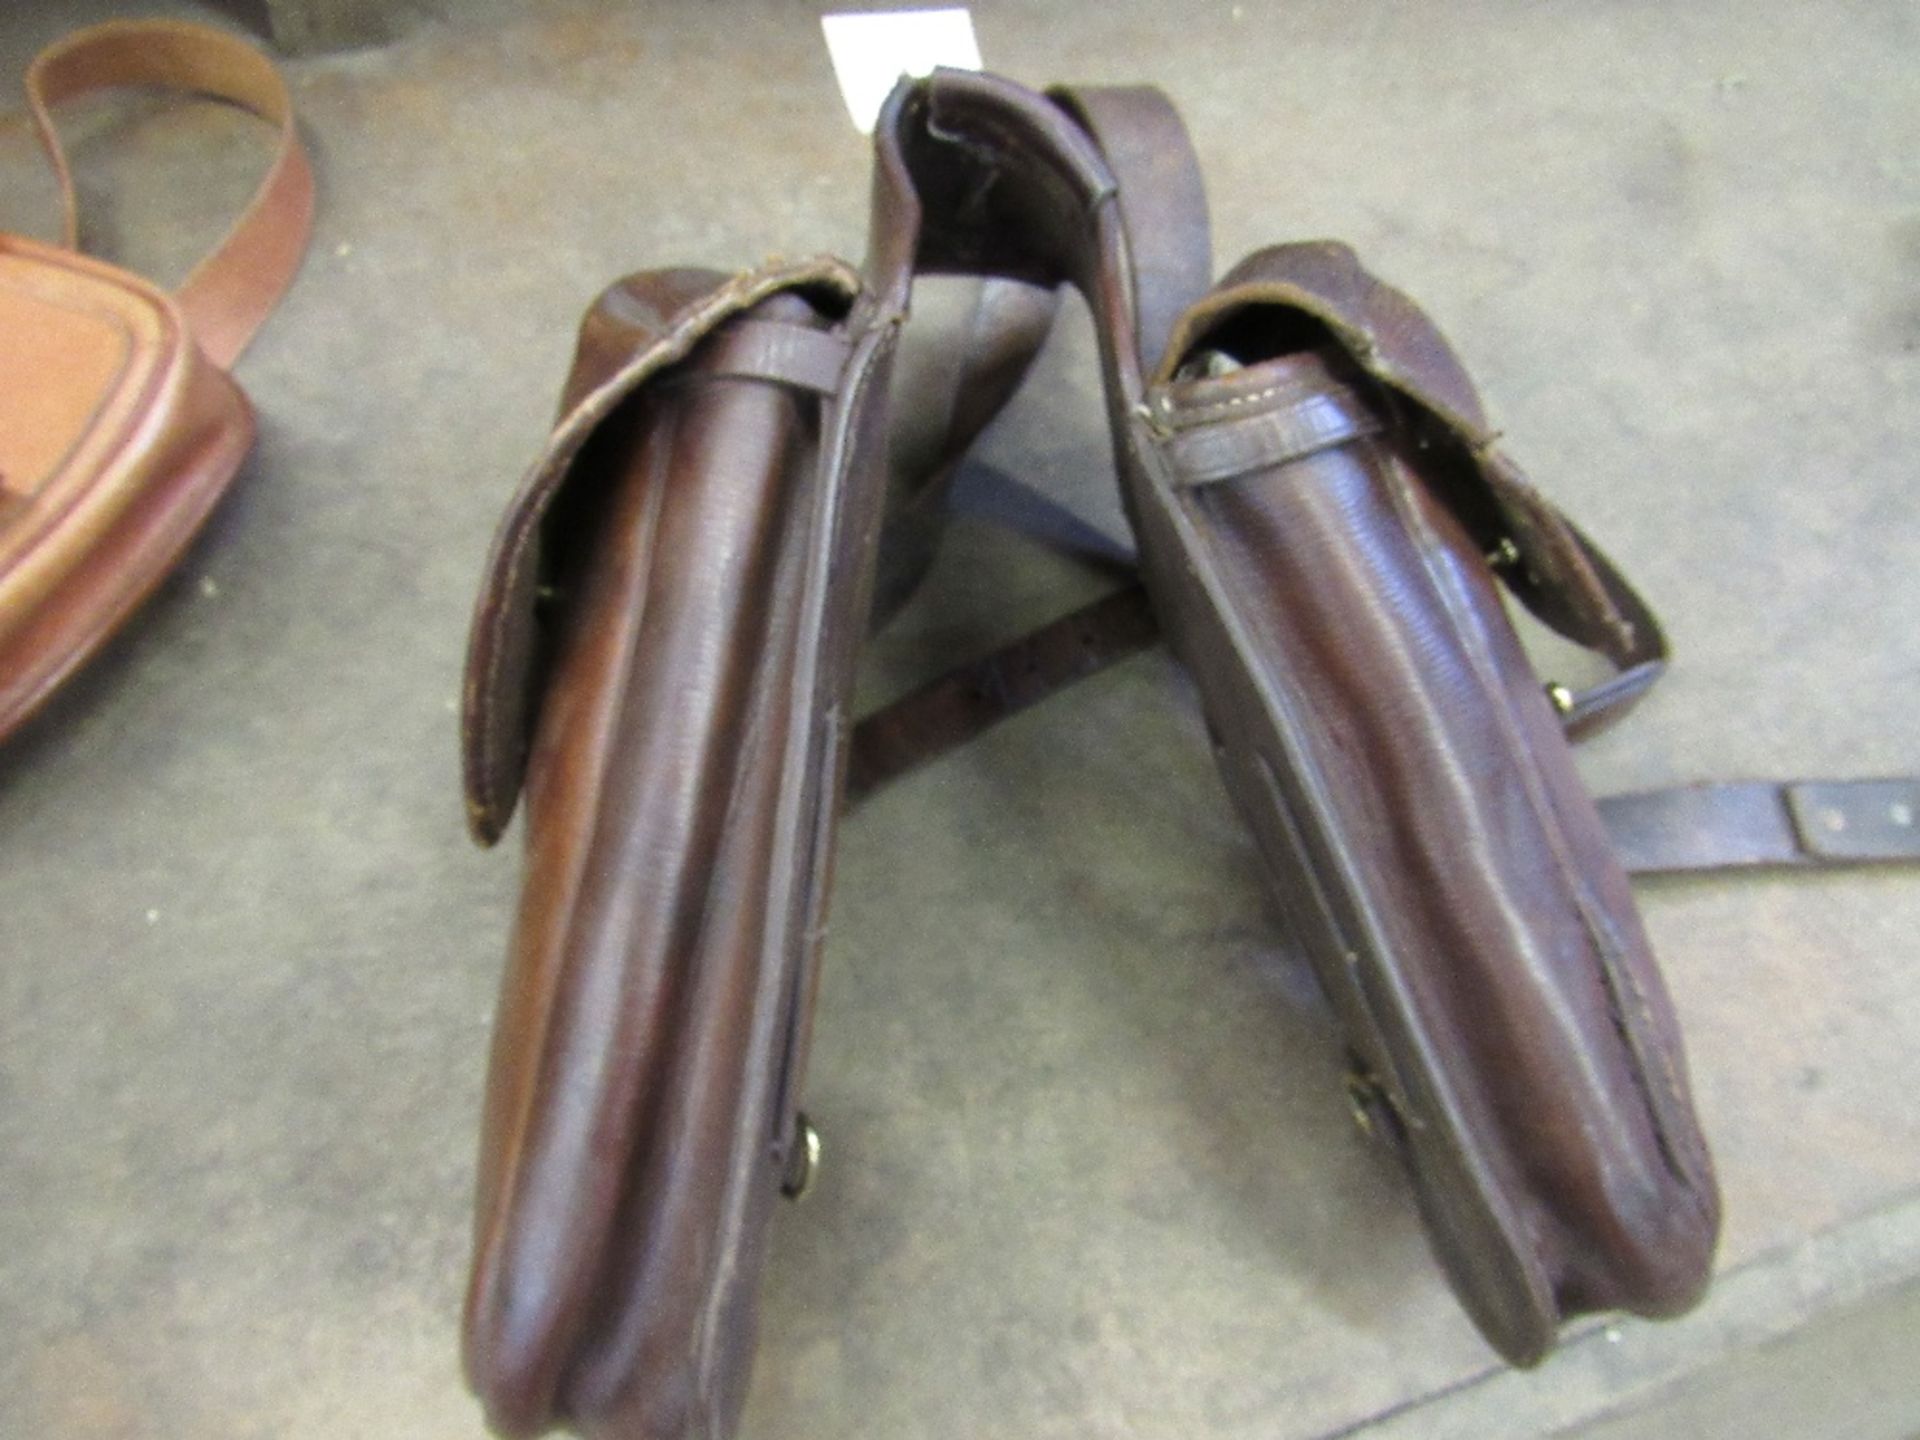 Pair of military leather saddle bags